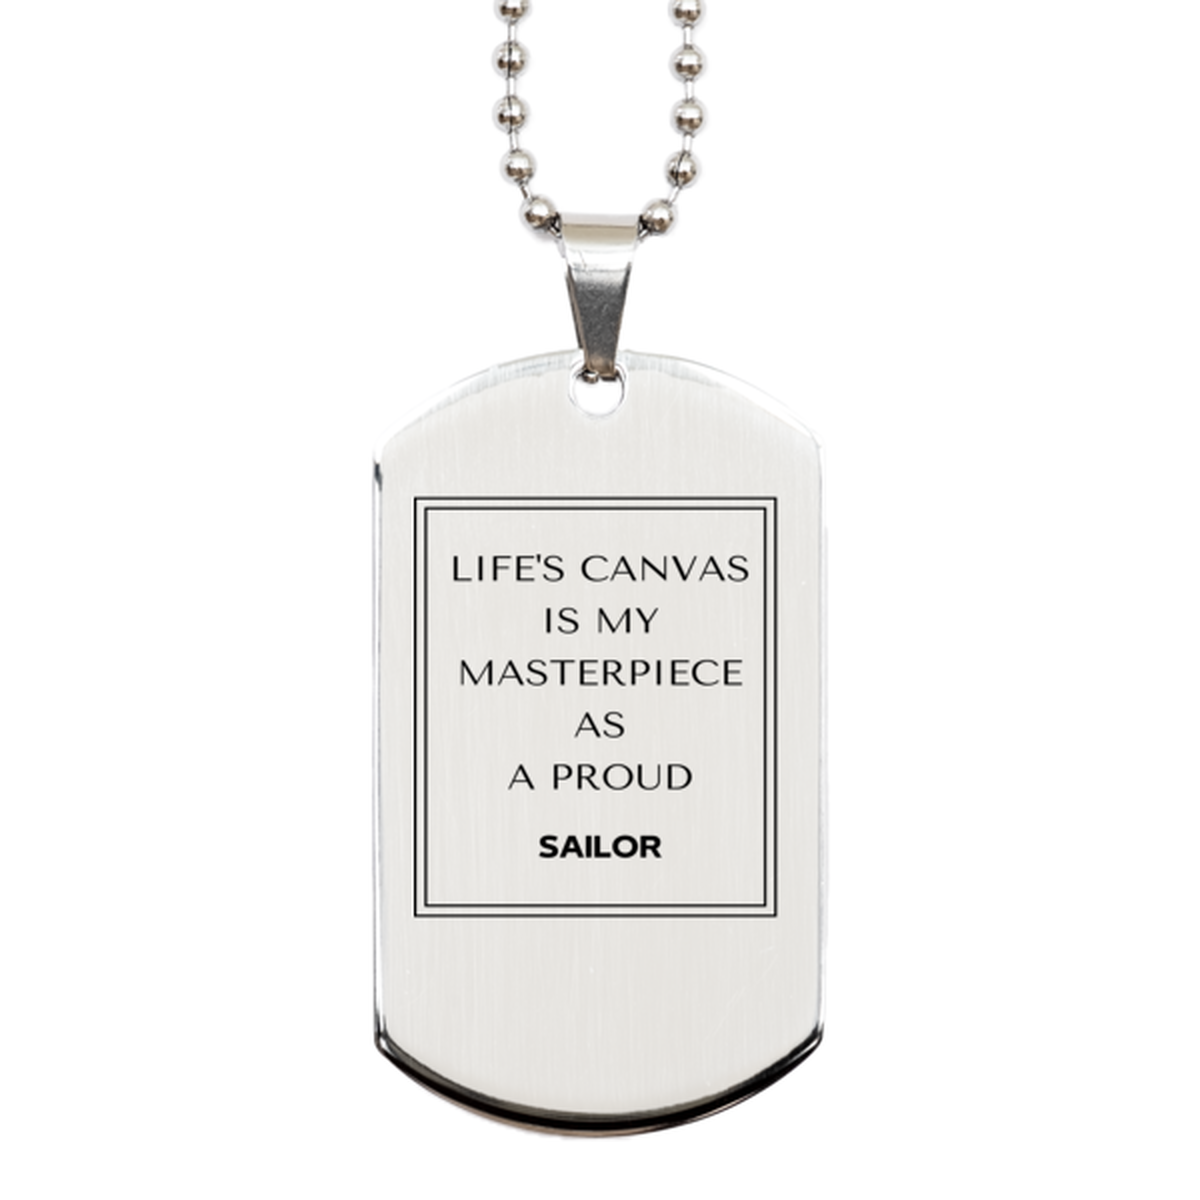 Proud Sailor Gifts, Life's canvas is my masterpiece, Epic Birthday Christmas Unique Silver Dog Tag For Sailor, Coworkers, Men, Women, Friends